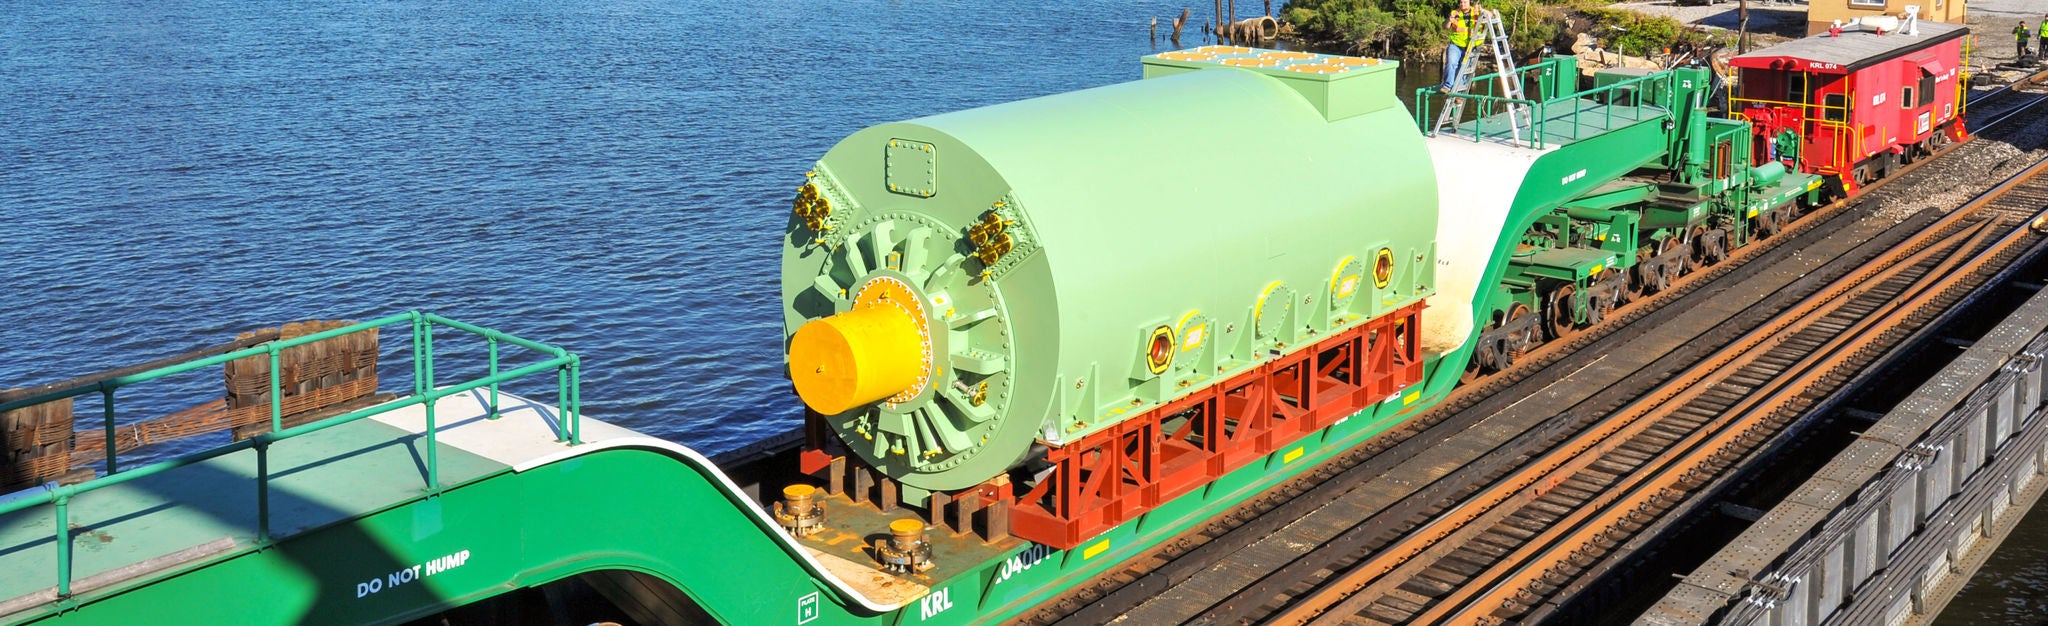 Large green object on a train on the tracks showing oversize freight shipping